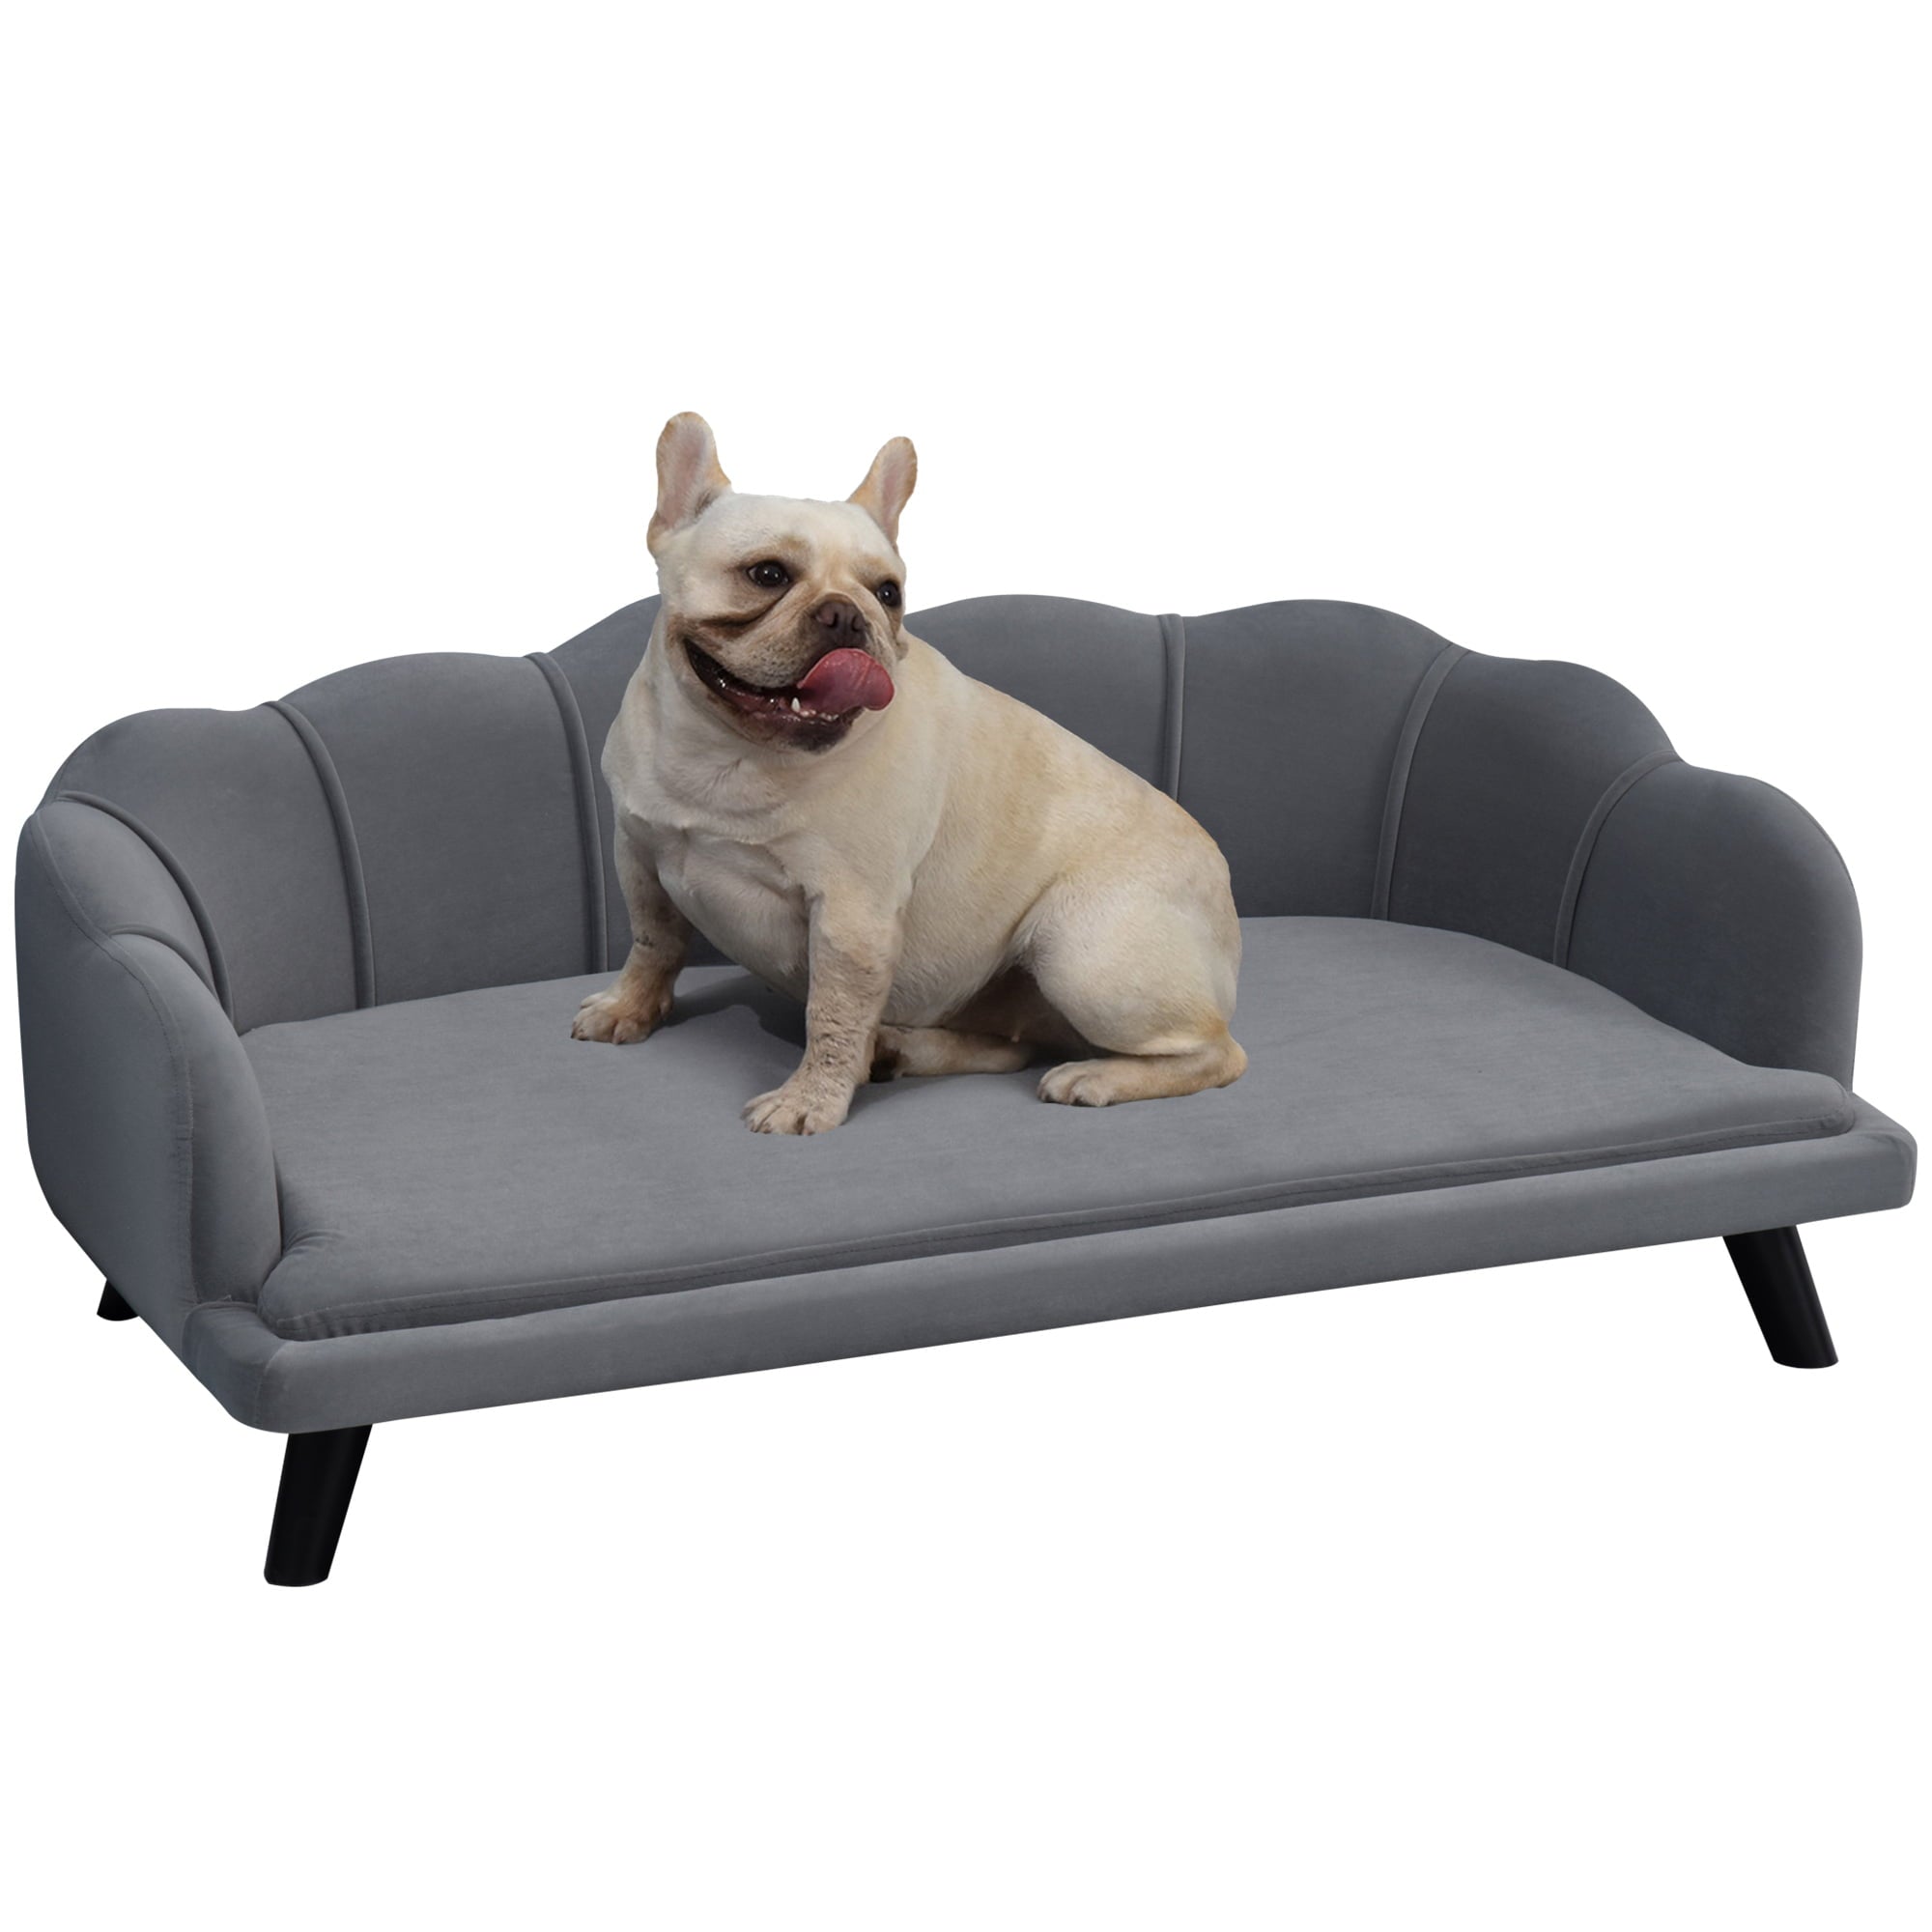 PawHut Velvet Large Dog Couch with Foam Cushioning， Soft and Cute Dog Bed with Pearl Design， Dog Sofa for Big and Medium Dogs， Charcoal Grey